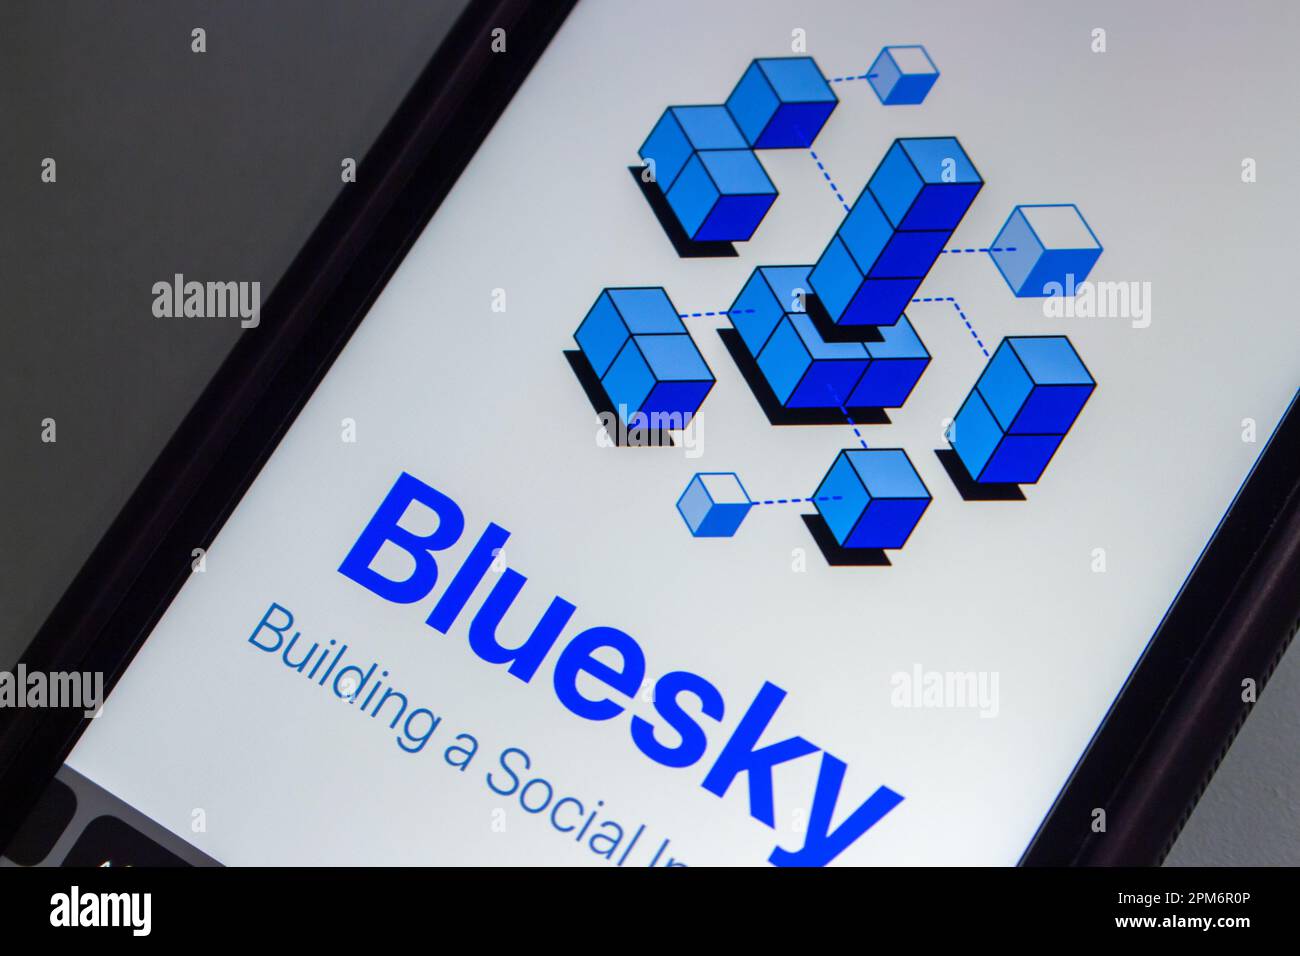 Website of Twitter alternative Bluesky Social seen in an iPhone screen. A decentralised social media protocol (Authenticated Transfer protocol) Stock Photo